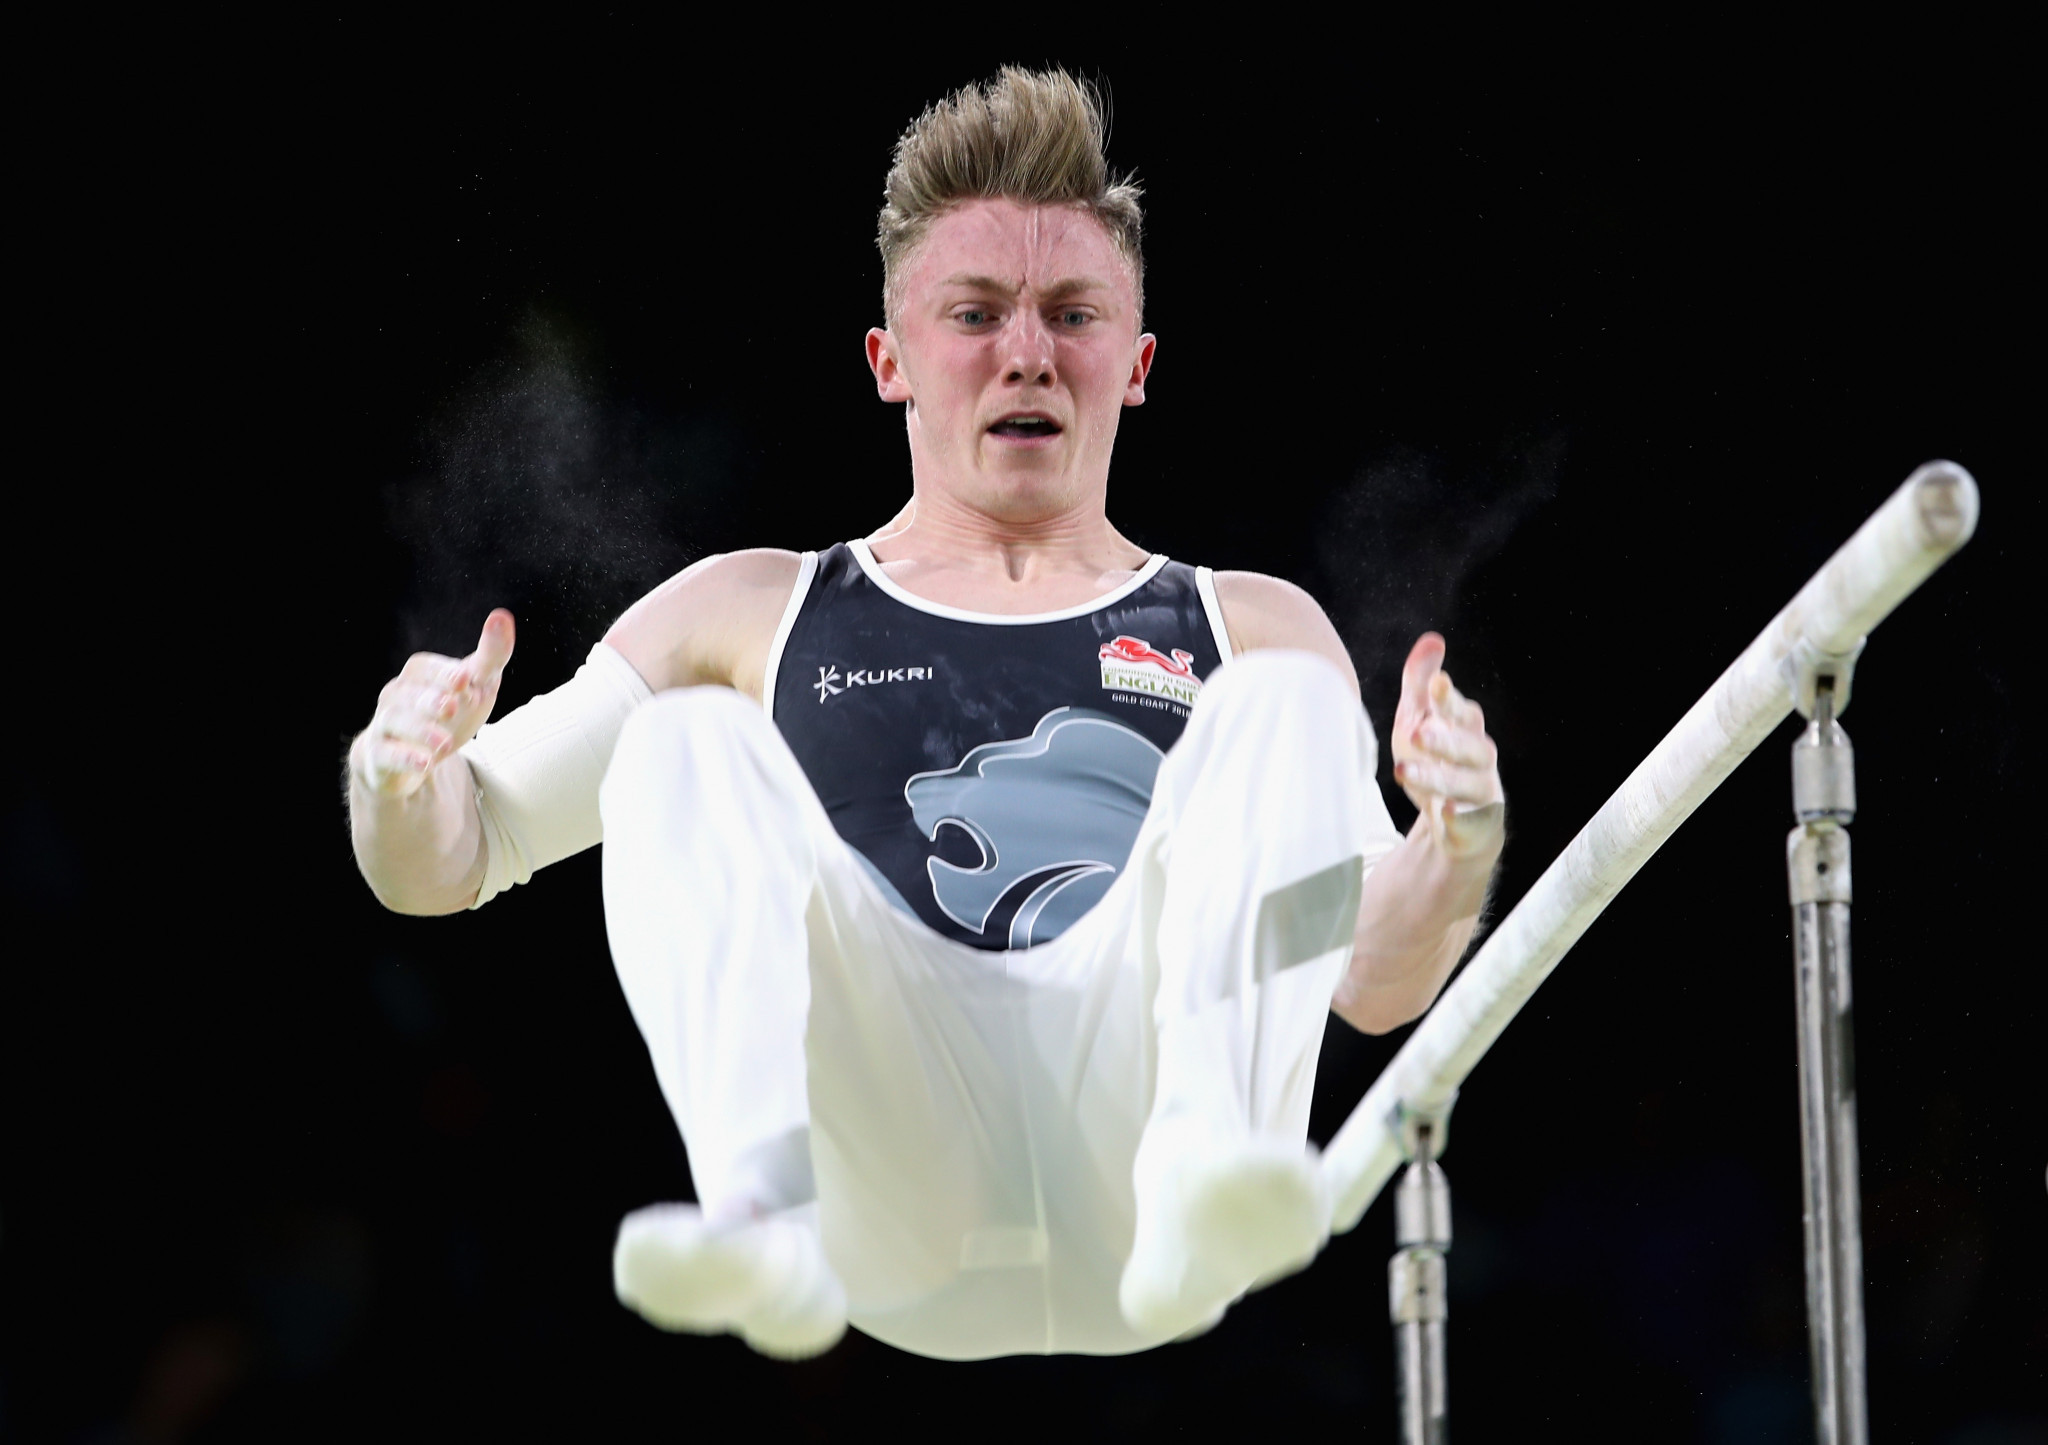 Rio 2016 Olympic medallist Nile Wilson claims "a culture of abuse" exists within the sport at both club and national level ©Getty Images